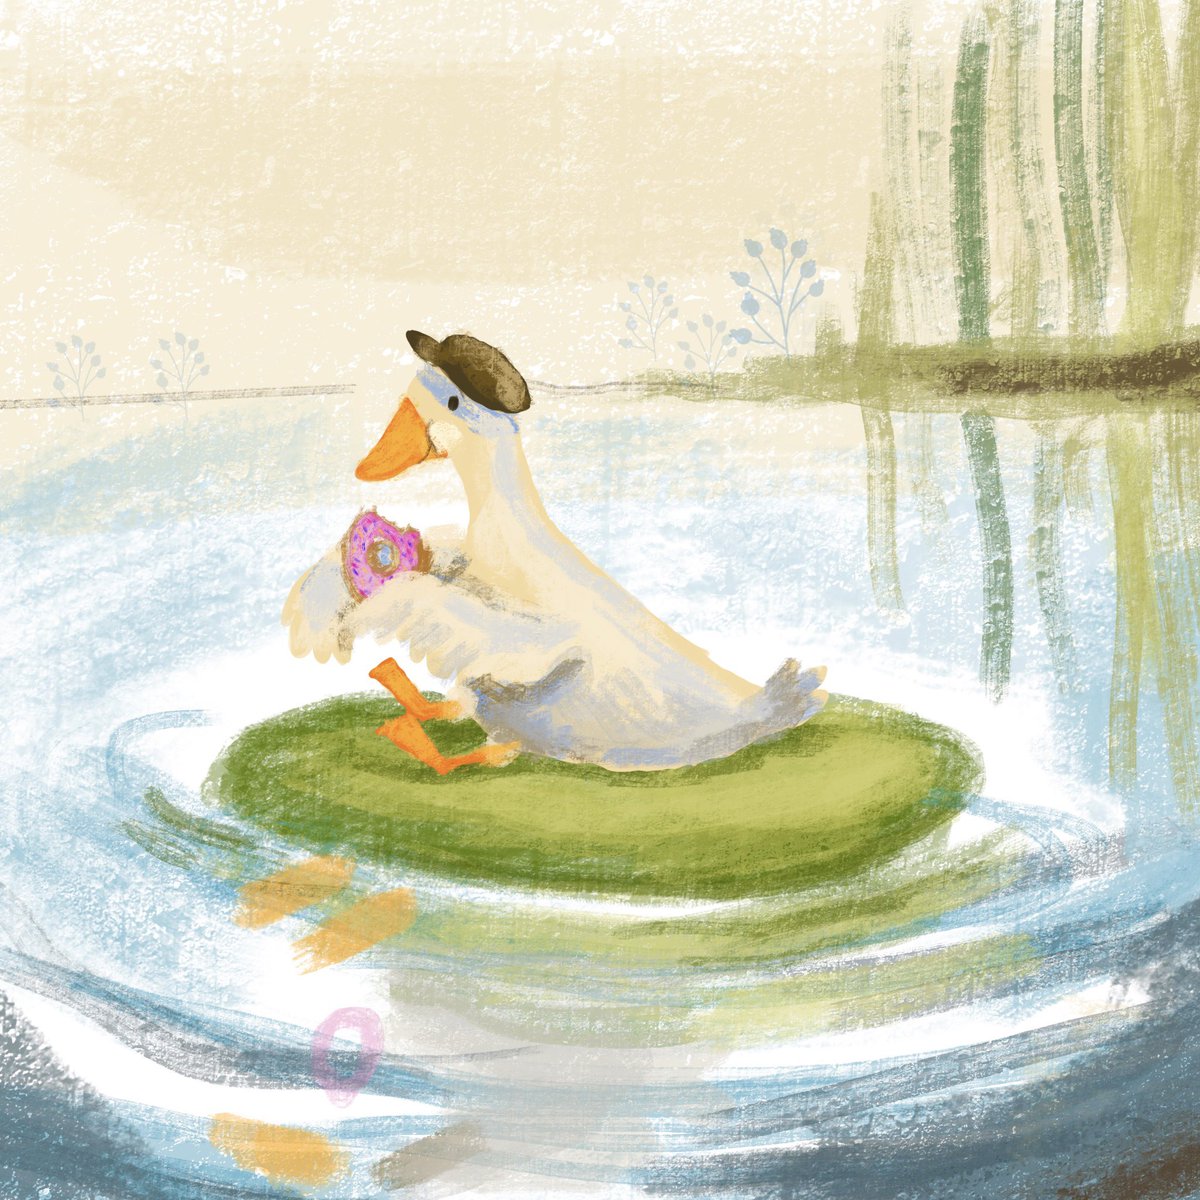 A duck and a donut. #kidlitart #childrensbooks